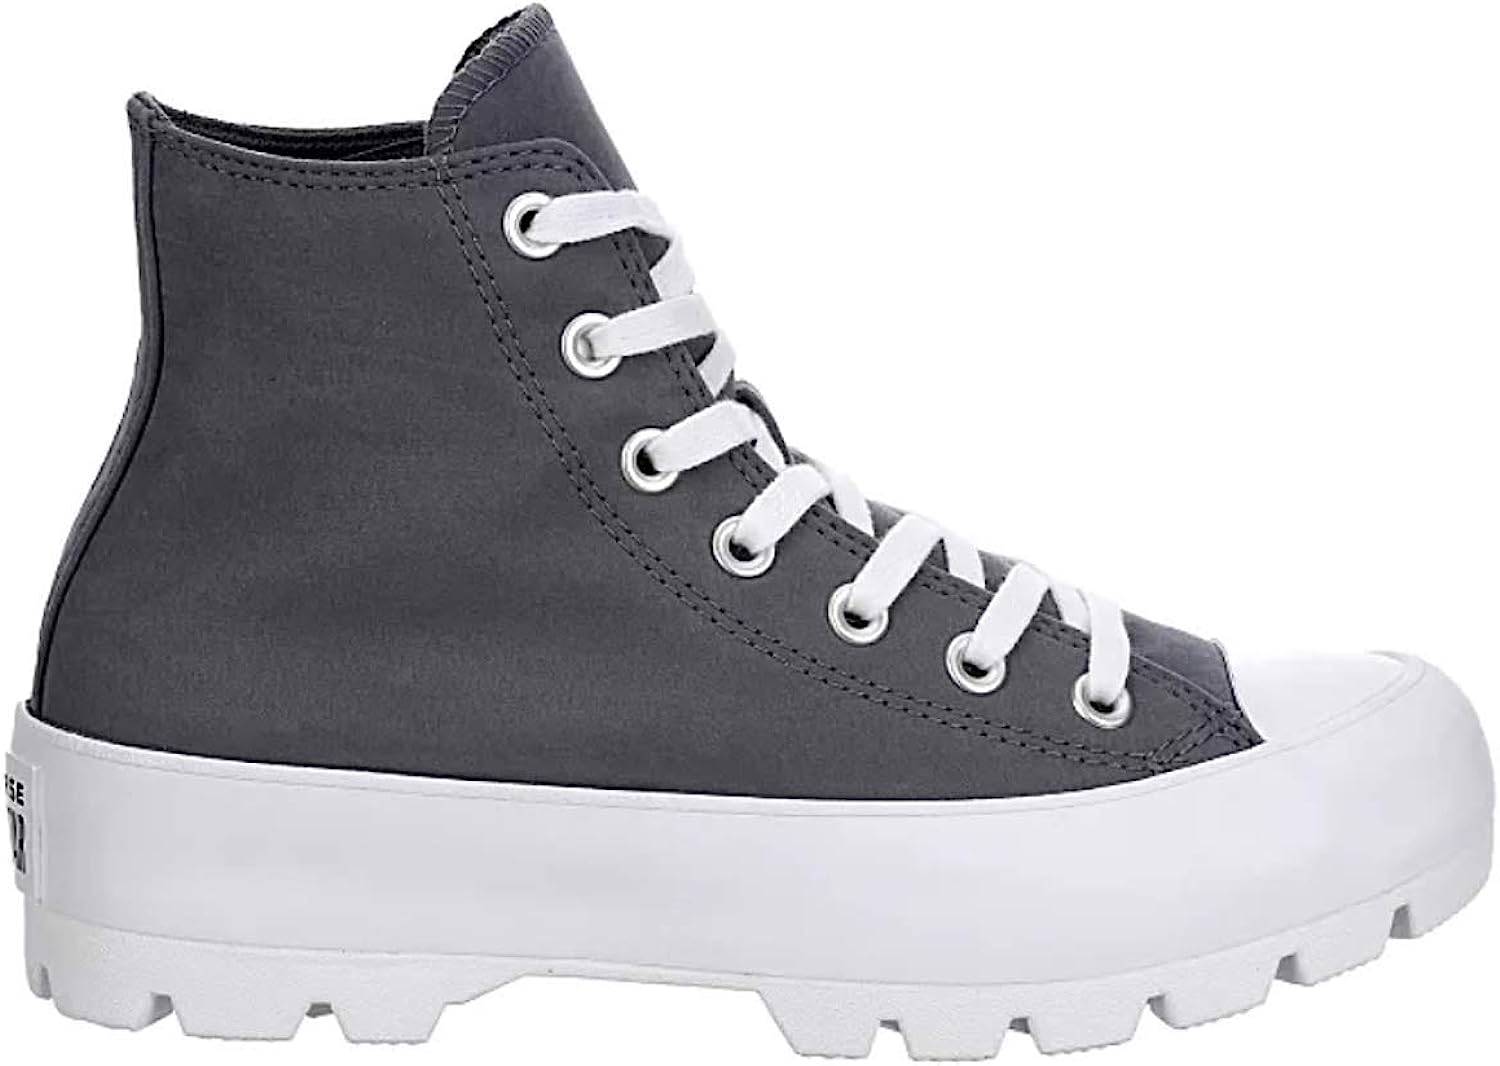 Women's Chuck Taylor All Star Lugged Hi Sneakers